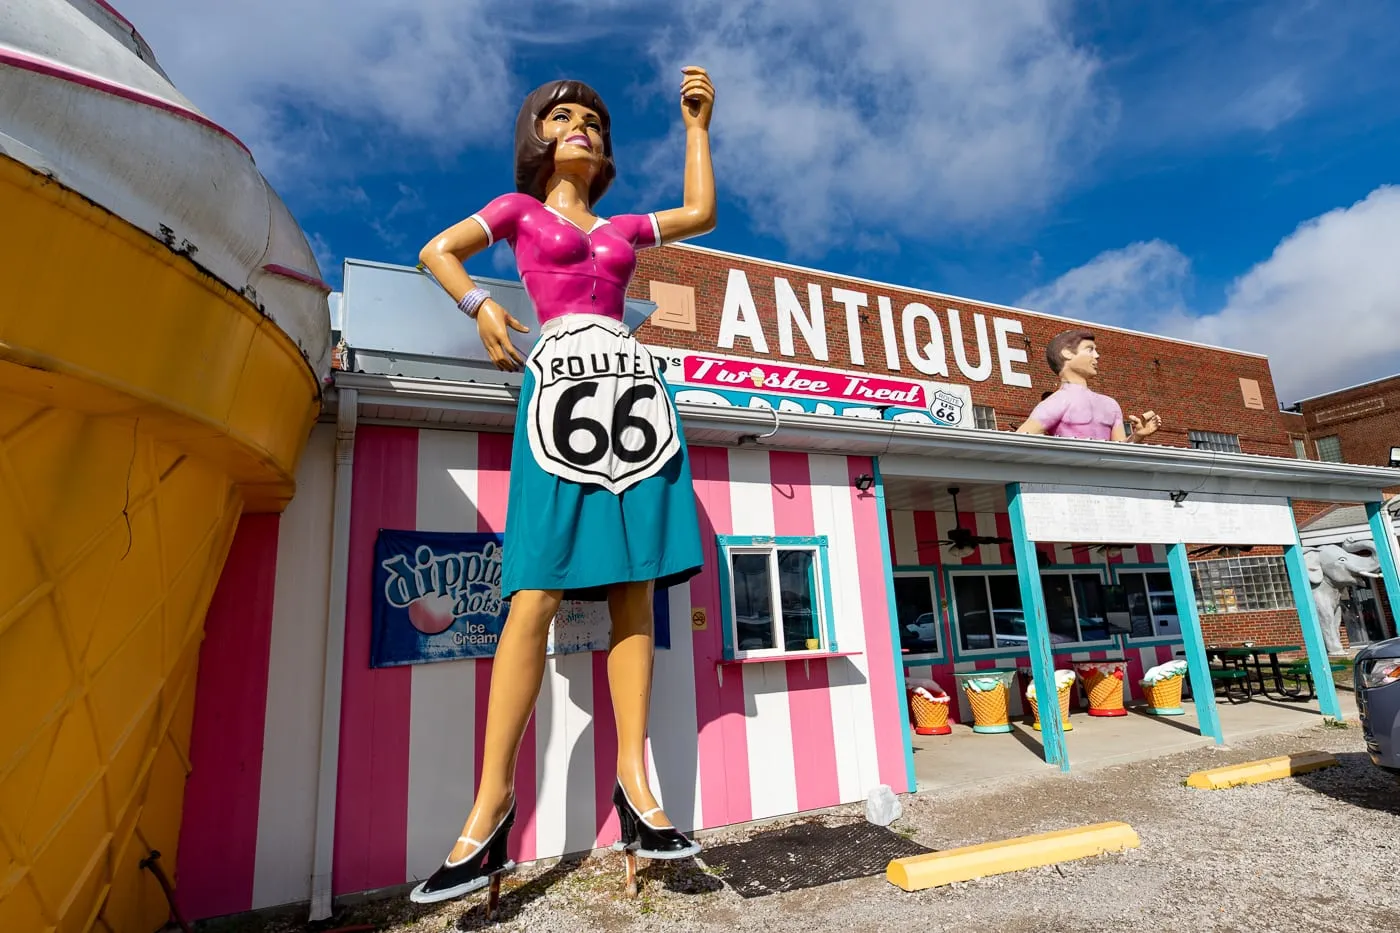 Waitress Uniroyal Gal at the Pink Elephant Antique Mall in Livingston, Illinois - Route 66 Roadside Attraction